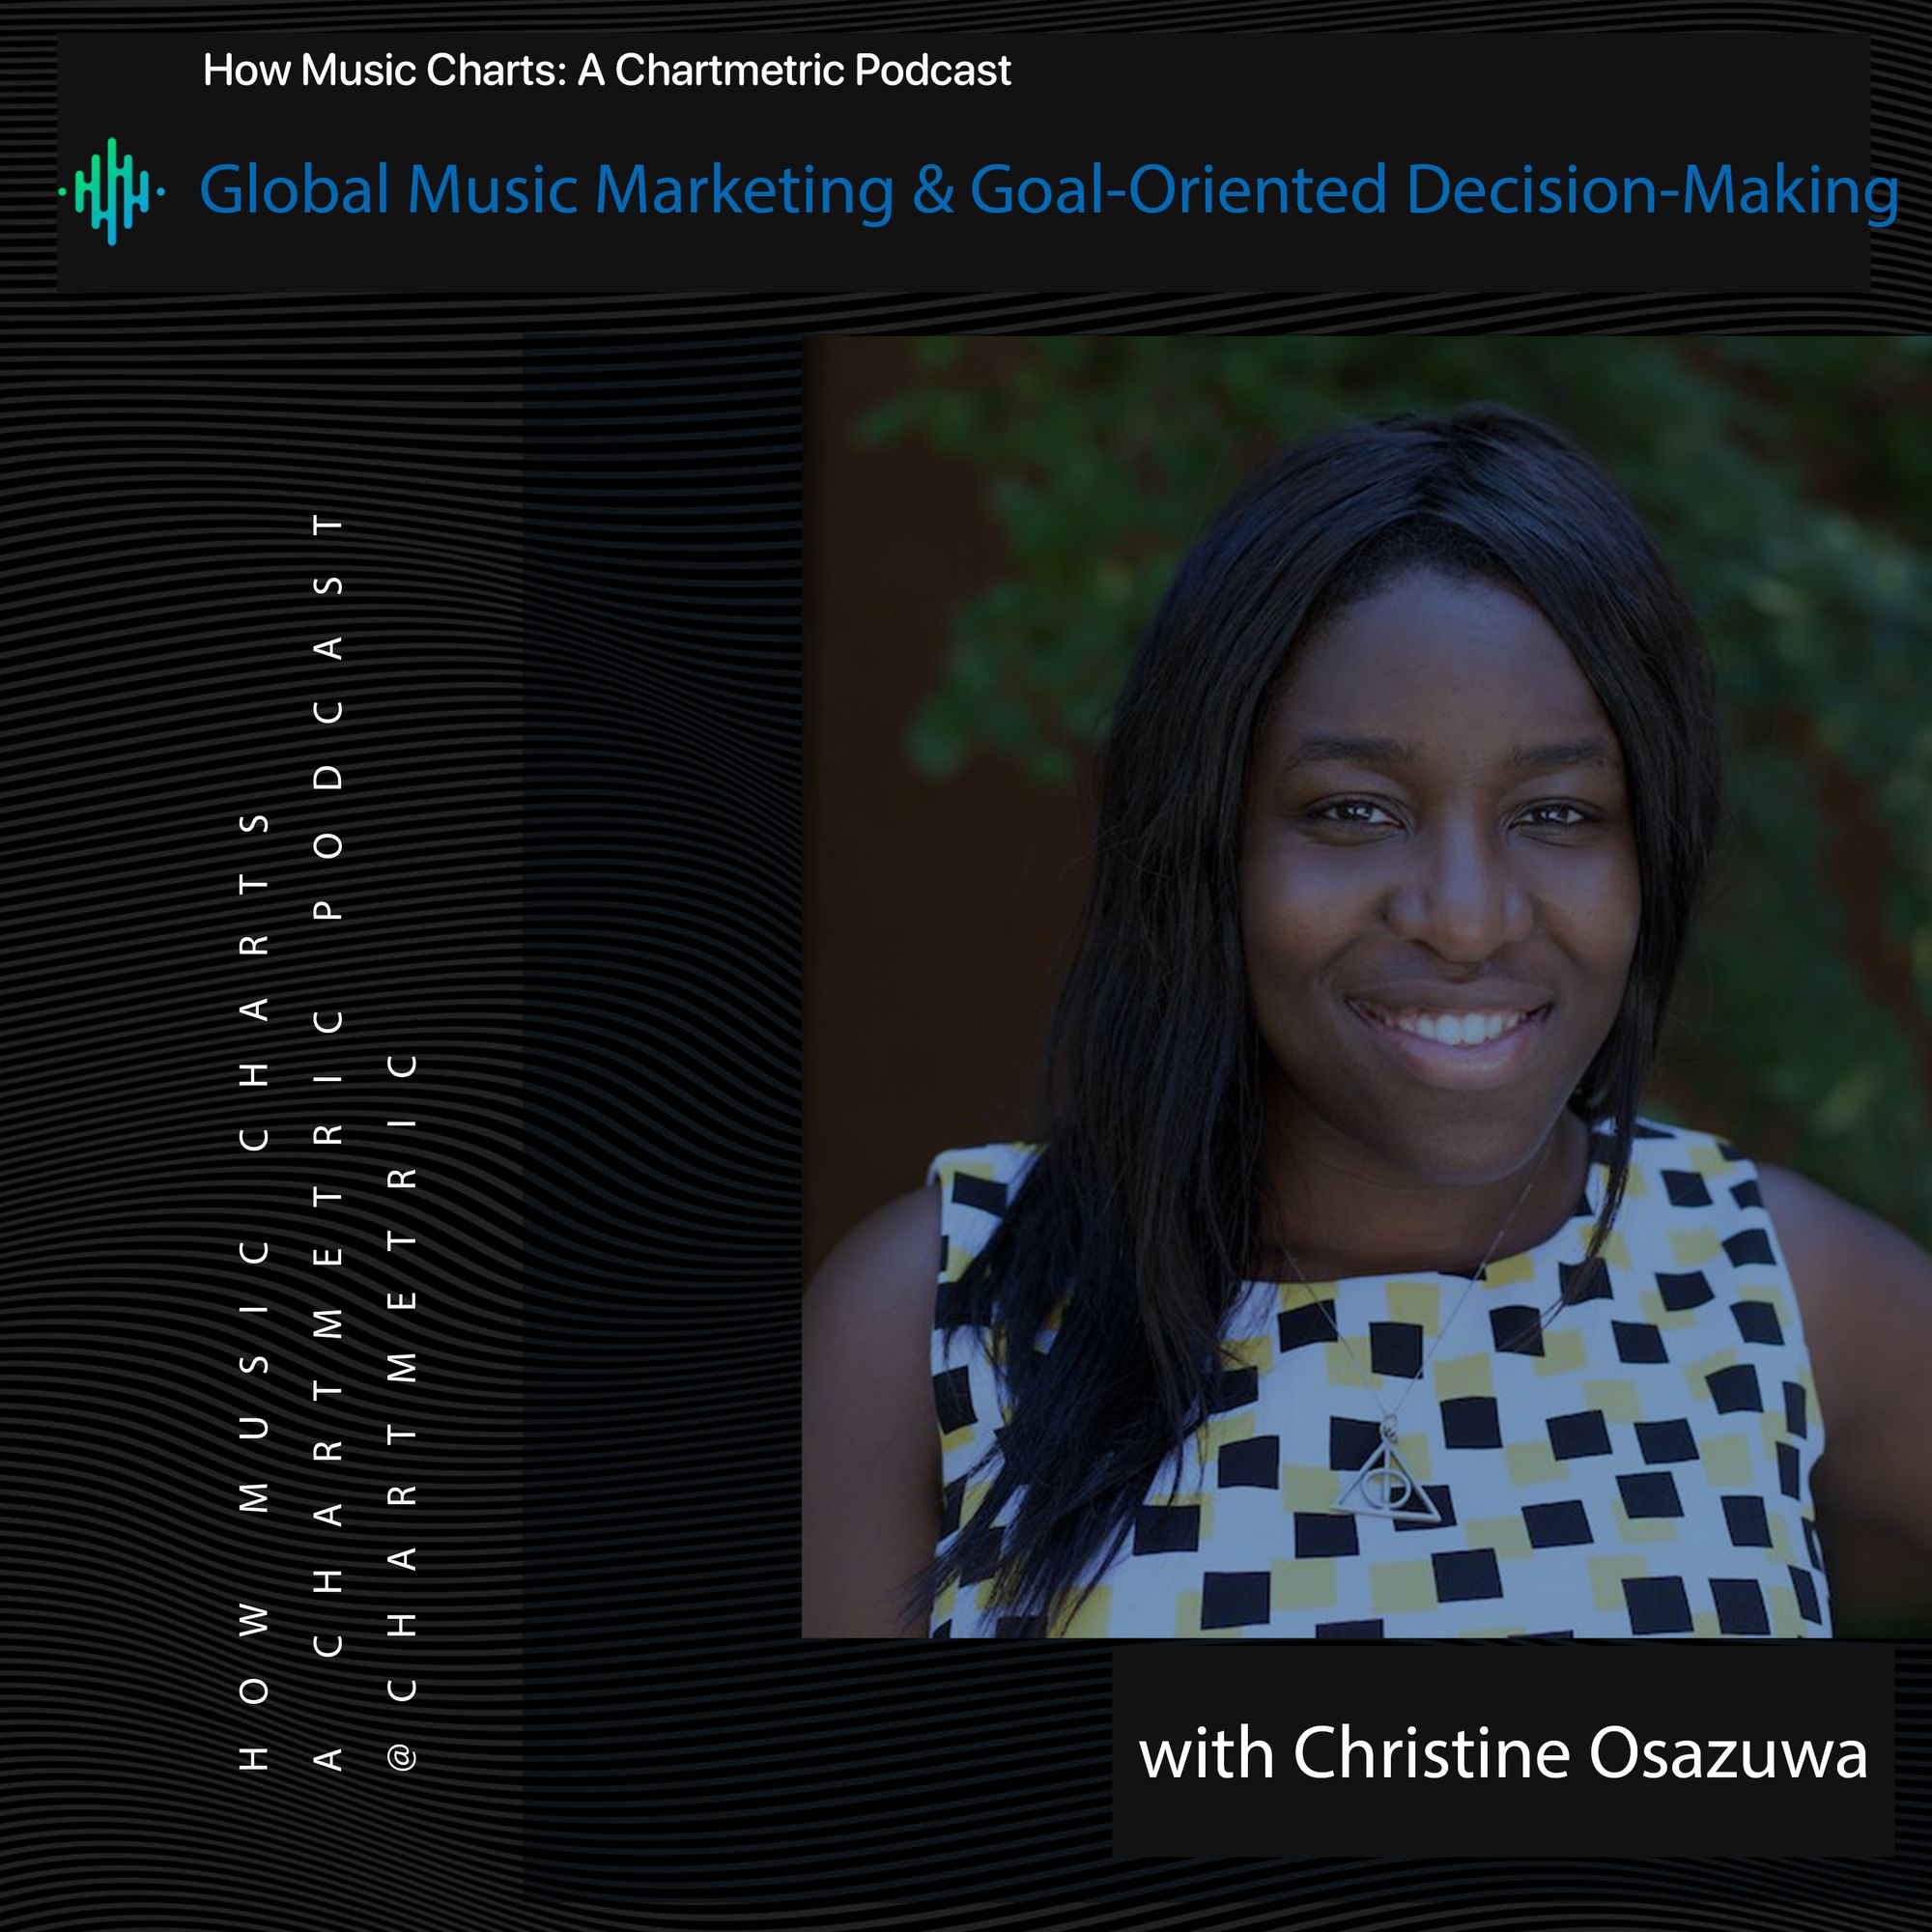 Christine Osazuwa on Goal-Oriented Decision-Making in the Music Industry